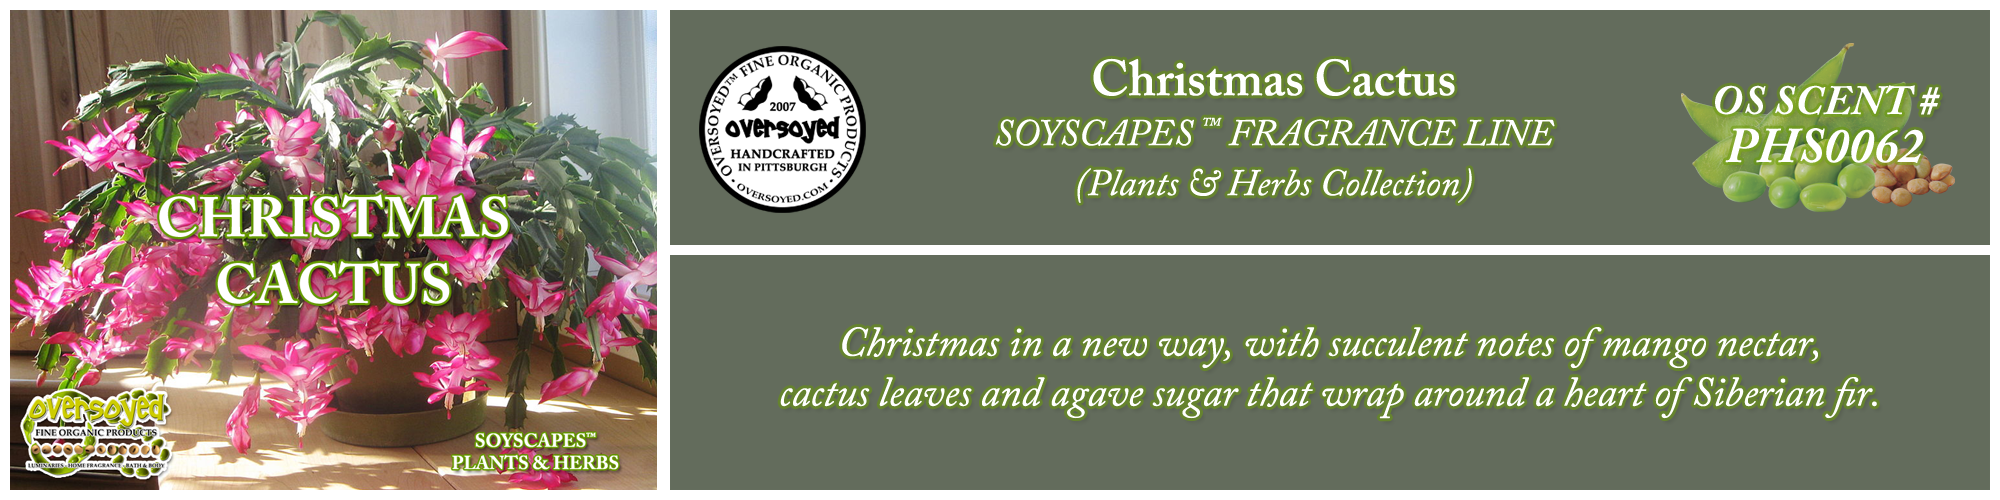 Christmas Cactus Handcrafted Products Collection